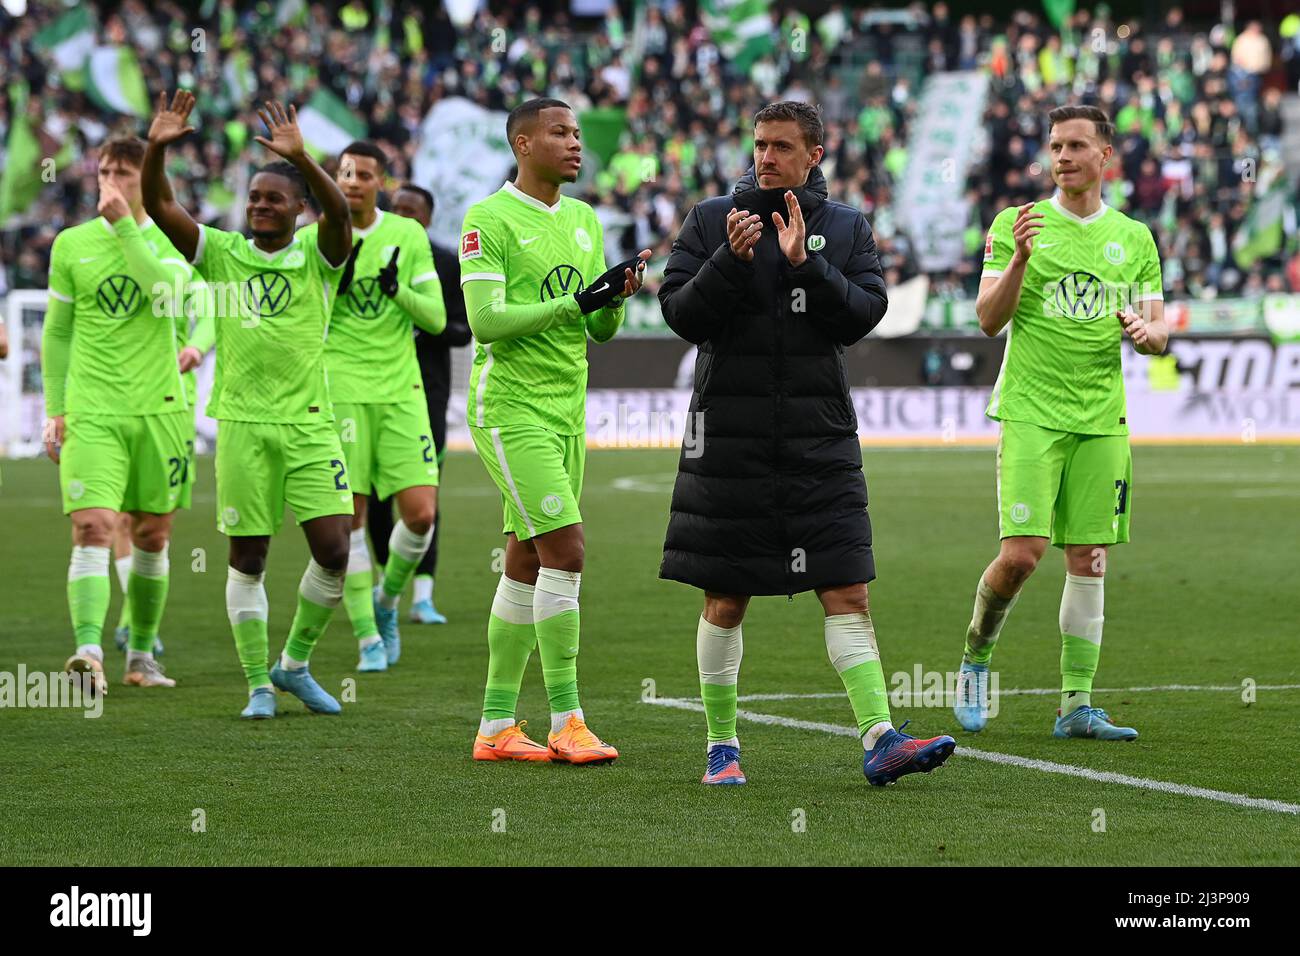 Wolfsburg, Germany. 09th Apr, 2022. Soccer: Bundesliga, VfL Wolfsburg - Arminia Bielefeld, Matchday 29, Volkswagen Arena. Wolfsburg's players rejoice after the game. Credit: Swen Pförtner/dpa - IMPORTANT NOTE: In accordance with the requirements of the DFL Deutsche Fußball Liga and the DFB Deutscher Fußball-Bund, it is prohibited to use or have used photographs taken in the stadium and/or of the match in the form of sequence pictures and/or video-like photo series./dpa/Alamy Live News Stock Photo